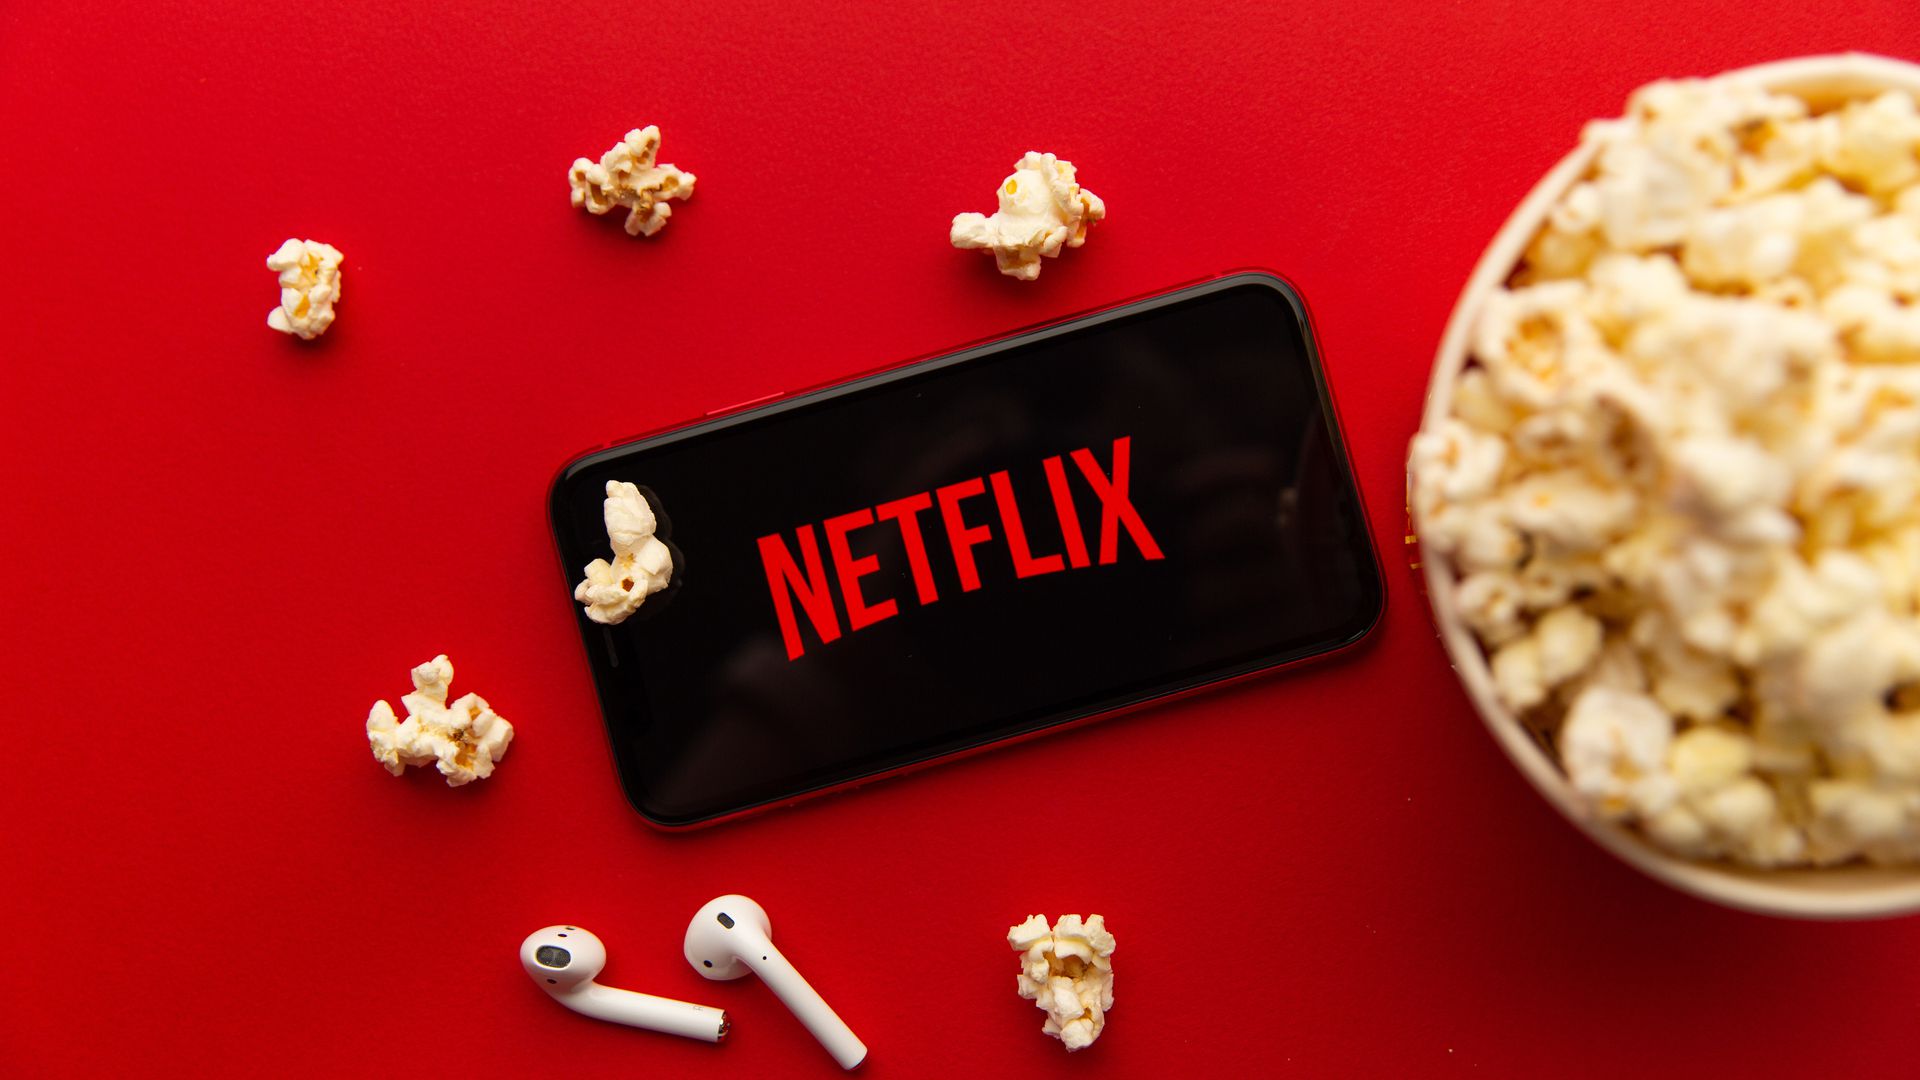 Netflix, the best news coming this week